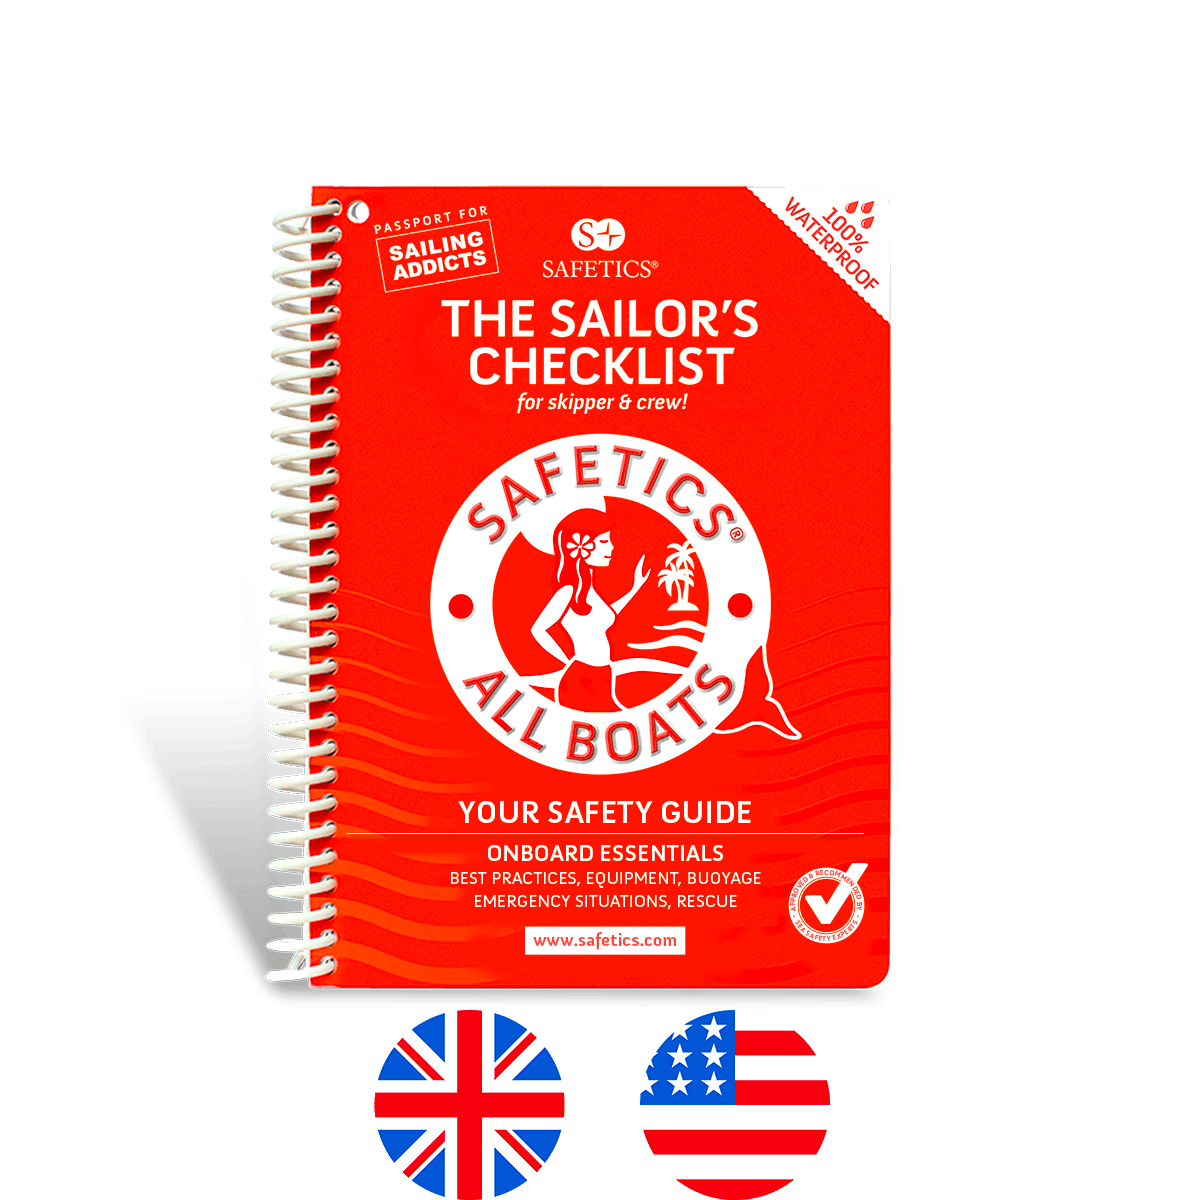 Safetics the Sailor's Checklist - Mermaid cover - with flags